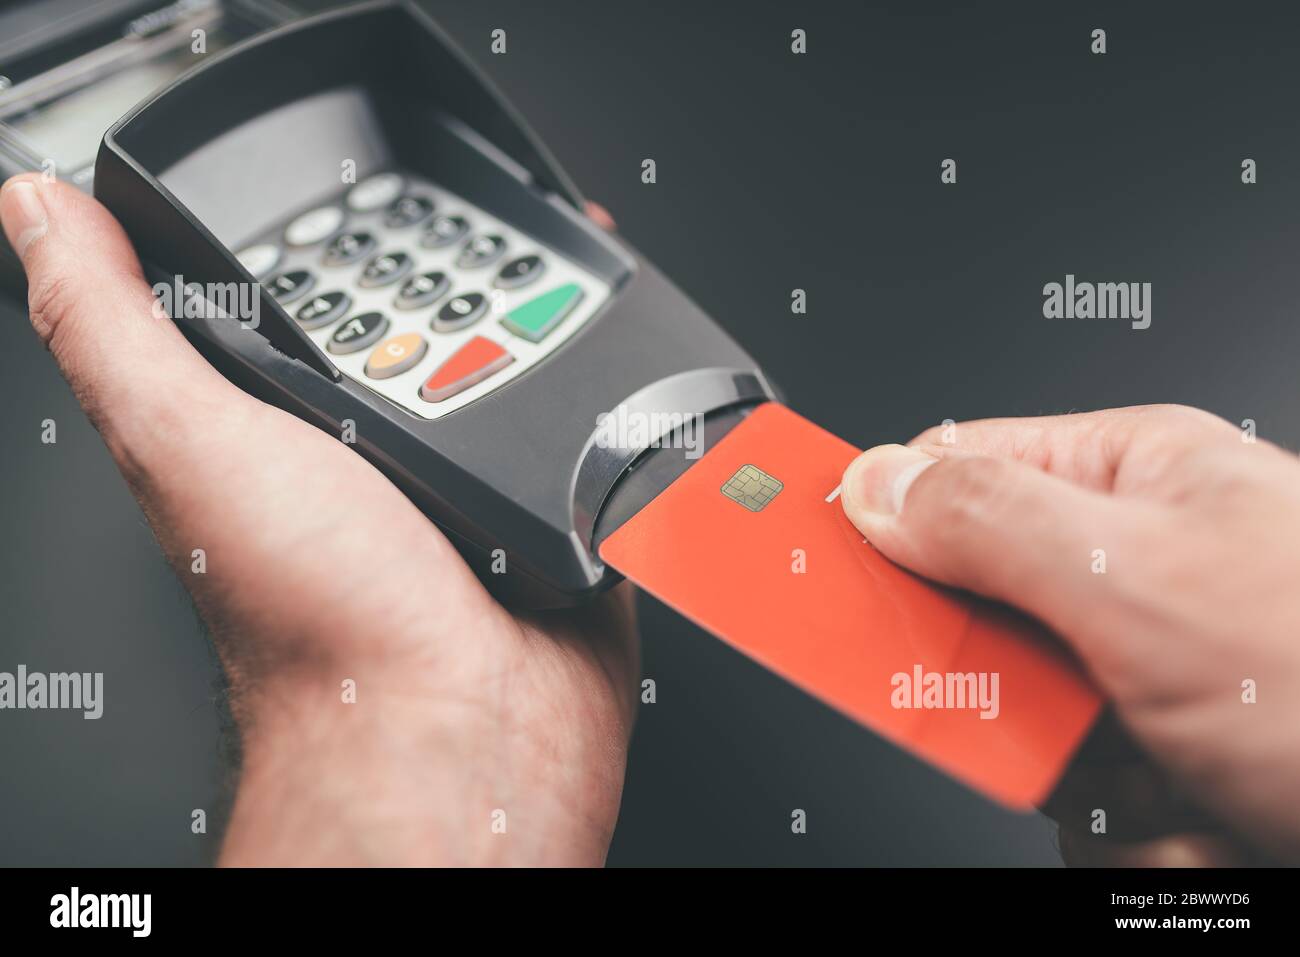 person inserts credit card or debit card into POS payment terminal or credit card reader Stock Photo